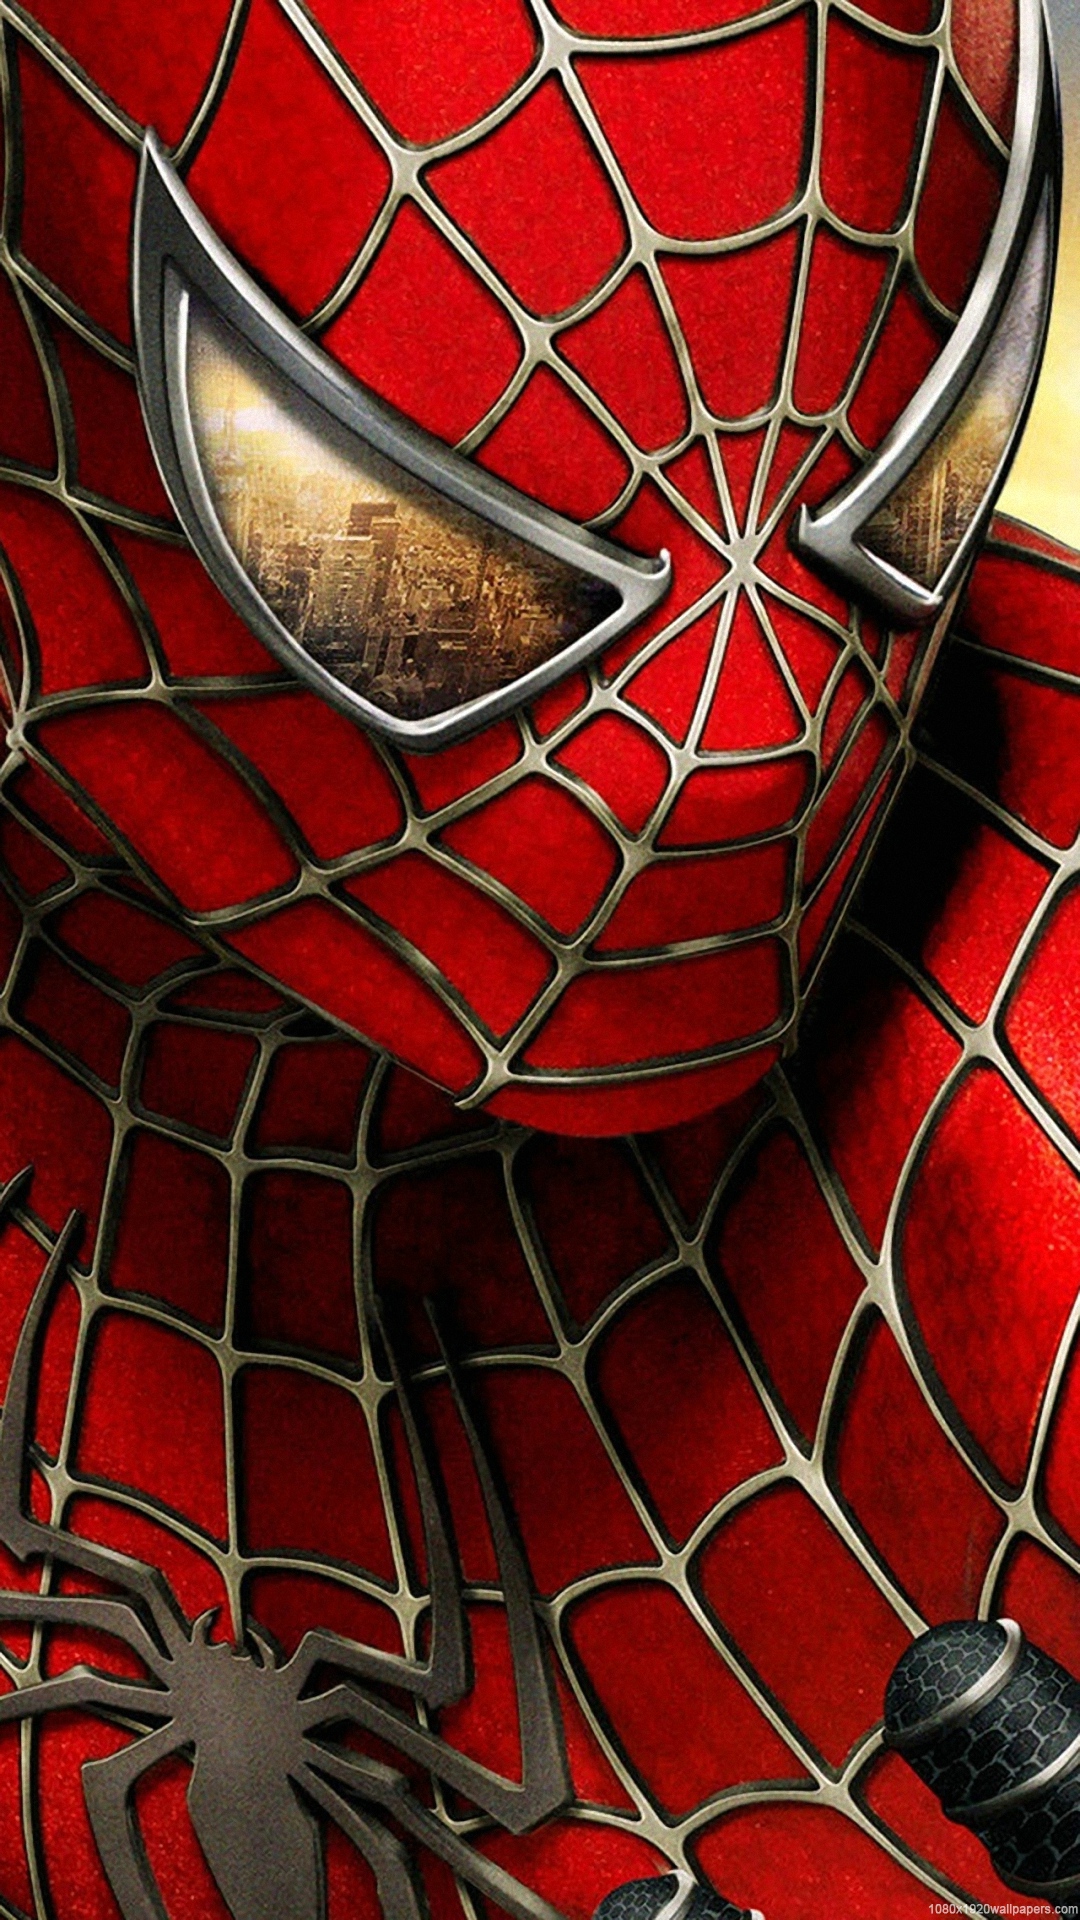 HD Spiderman Wallpaper For iPhone